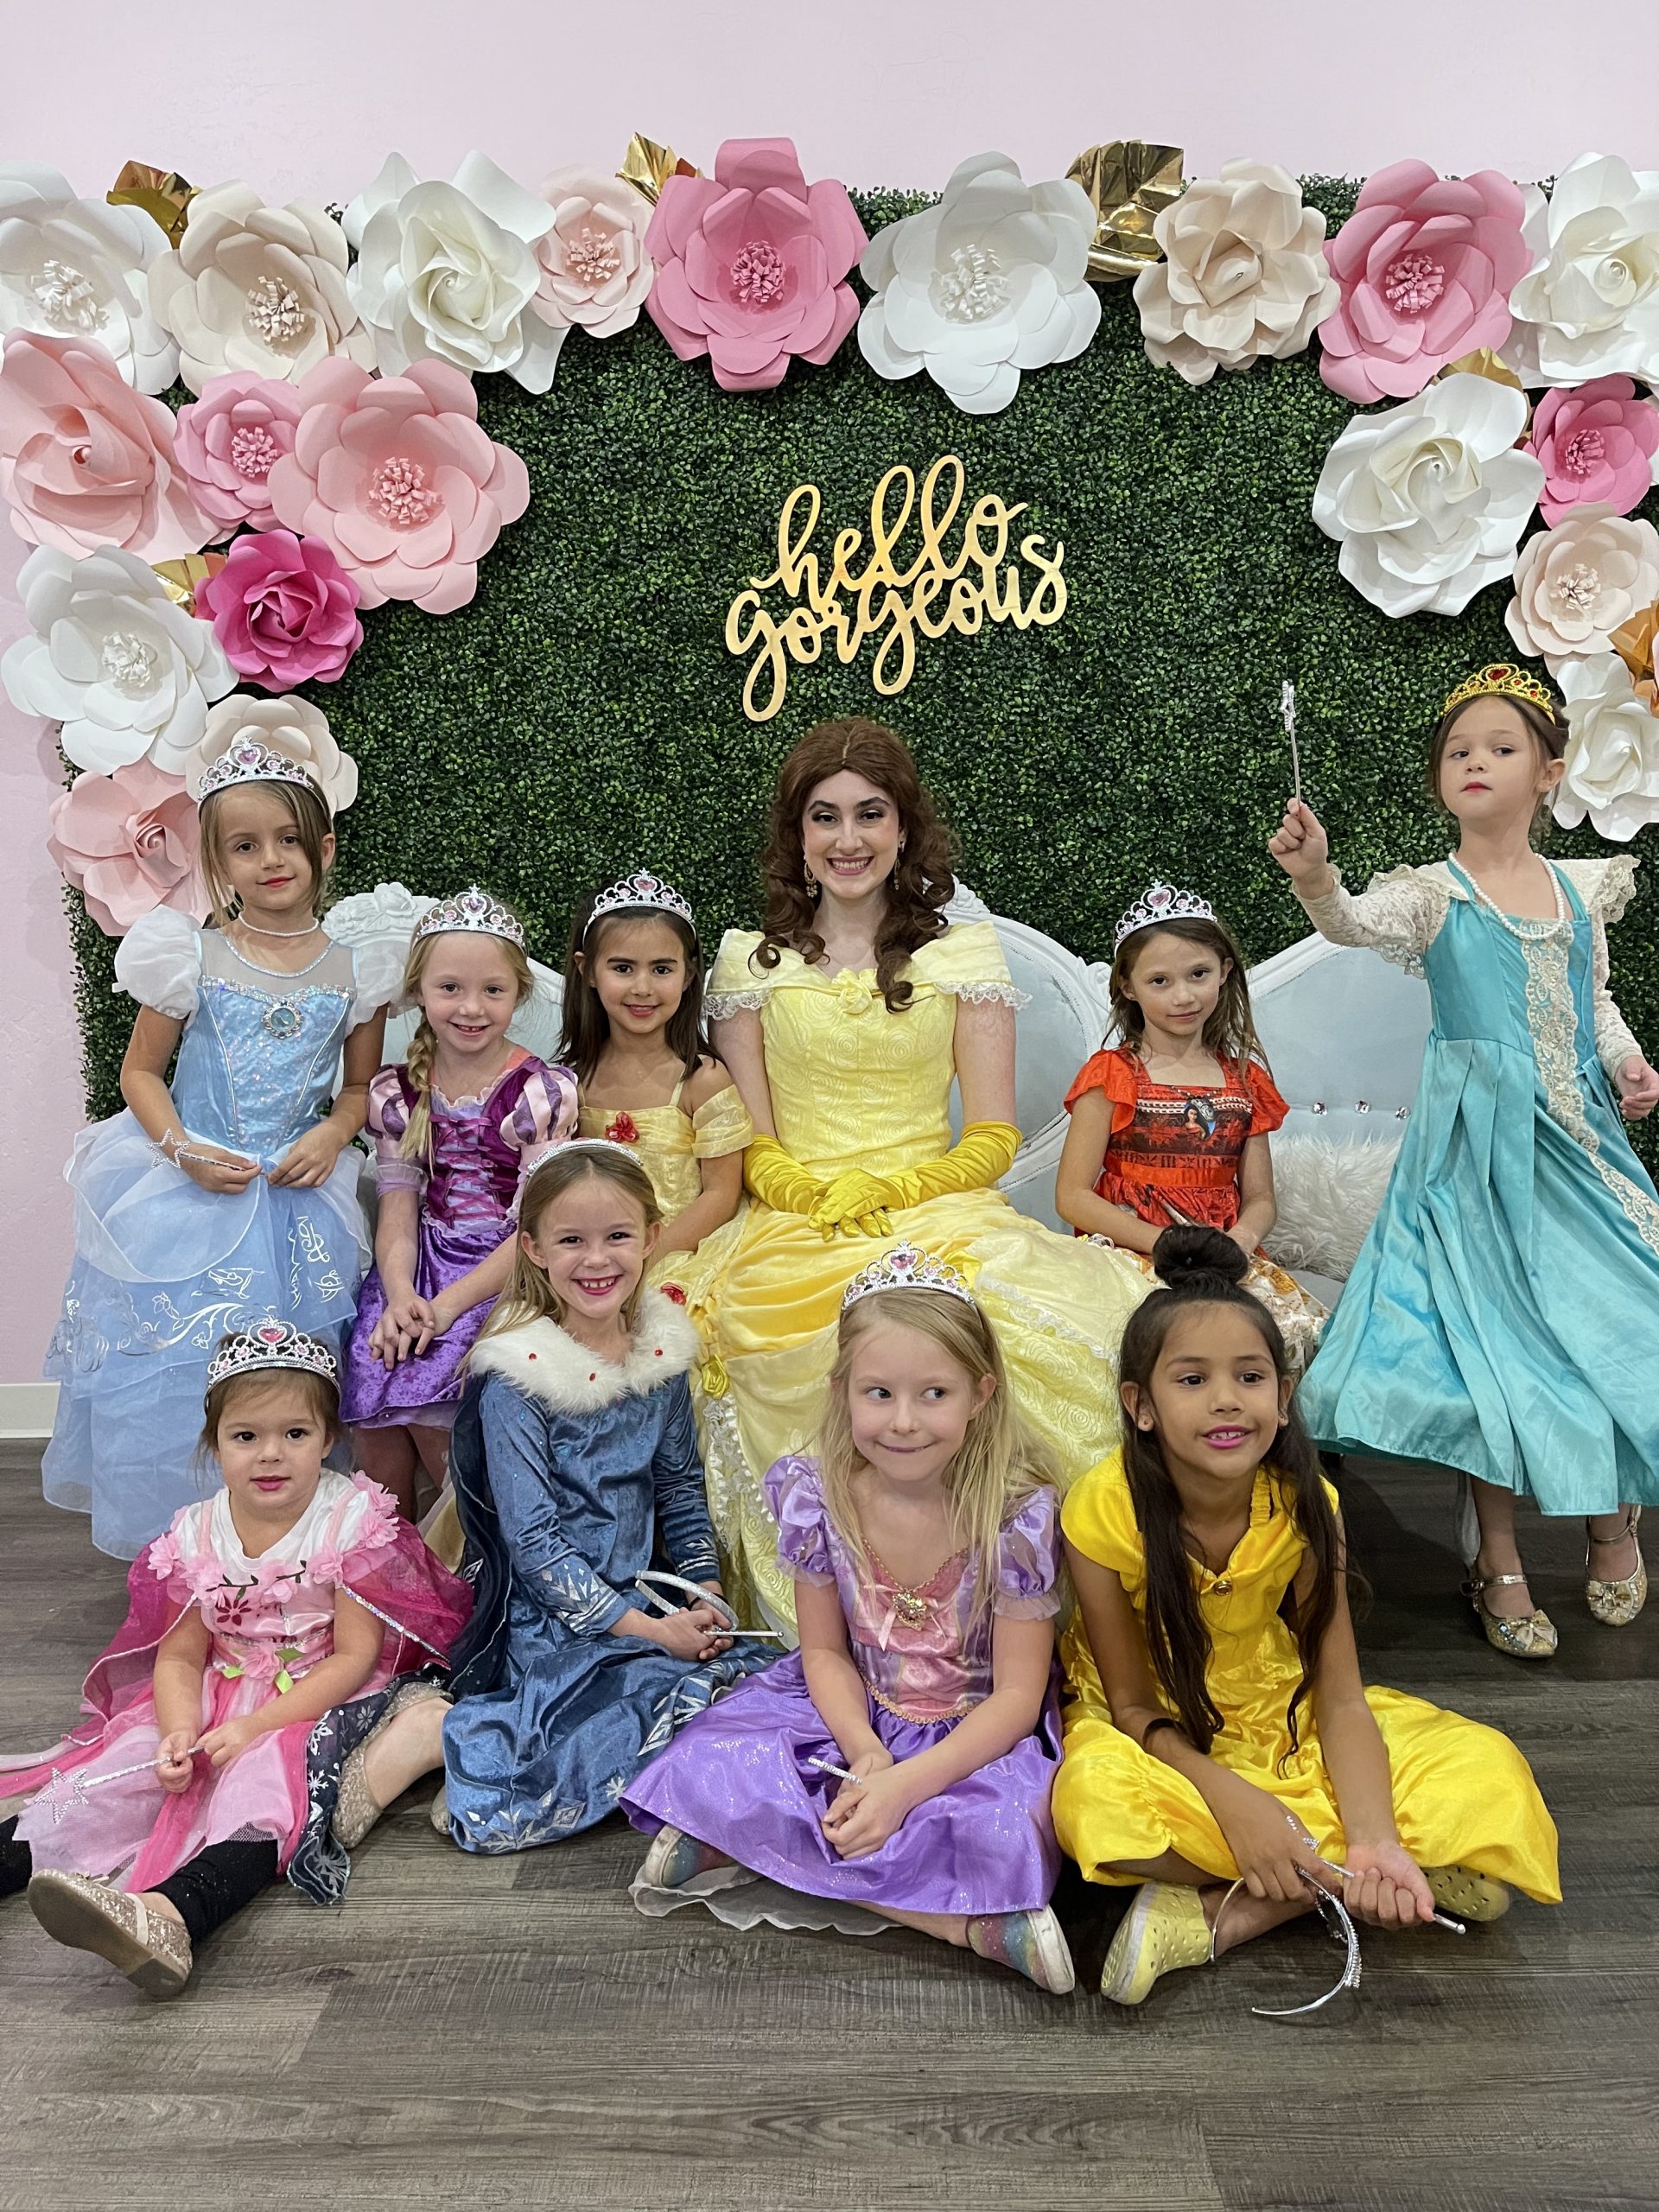 Little girls dressed up as princesses with Belle